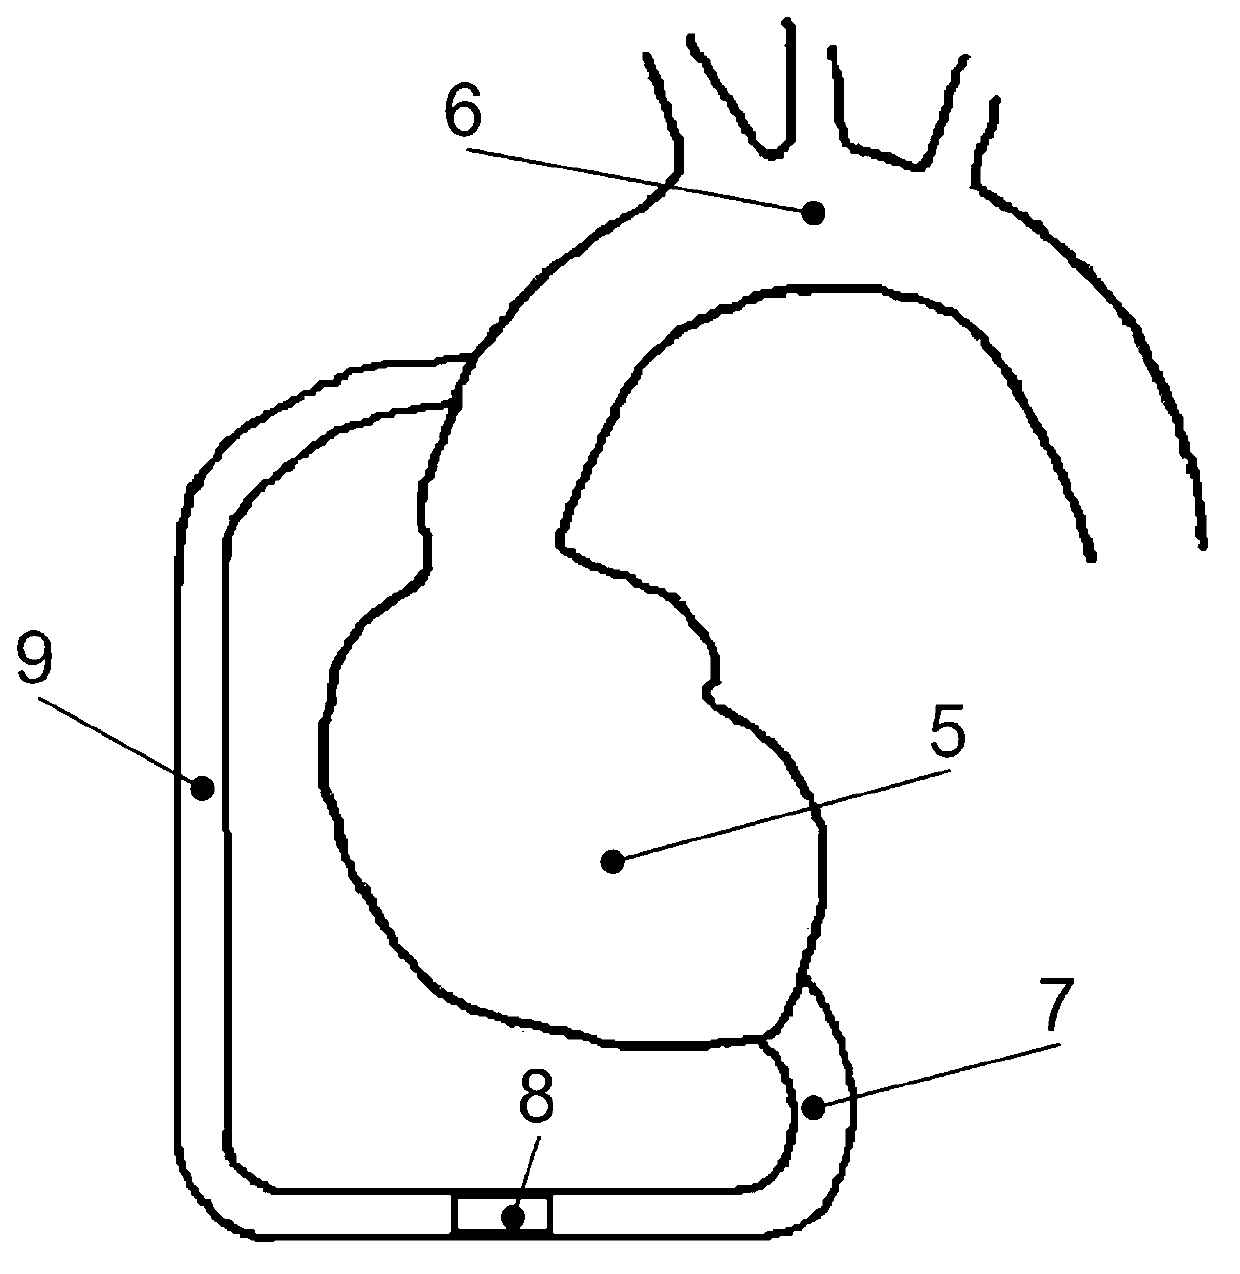 Auxiliary circulation blood pump adopted in serially connecting operation modes and installing method of auxiliary circulation blood pump